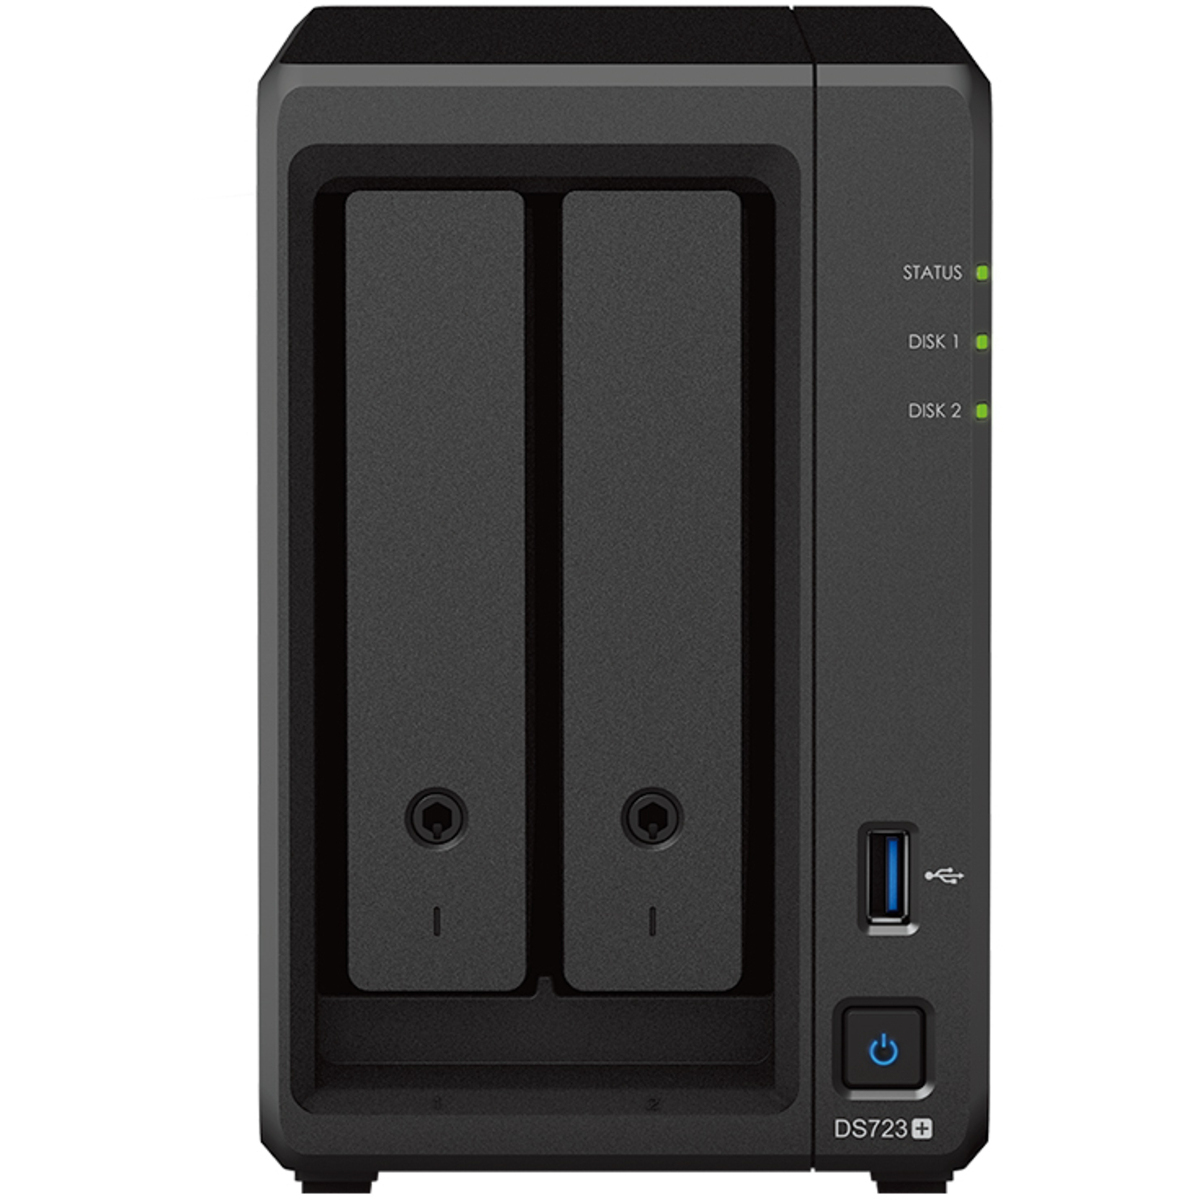 buy Synology DiskStation DS723+ 44tb Desktop NAS - Network Attached Storage Device 2x22000gb Western Digital Red Pro WD221KFGX 3.5 7200rpm SATA 6Gb/s HDD NAS Class Drives Installed - Burn-In Tested - nas headquarters buy network attached storage server device das new raid-5 free shipping usa spring sale DiskStation DS723+